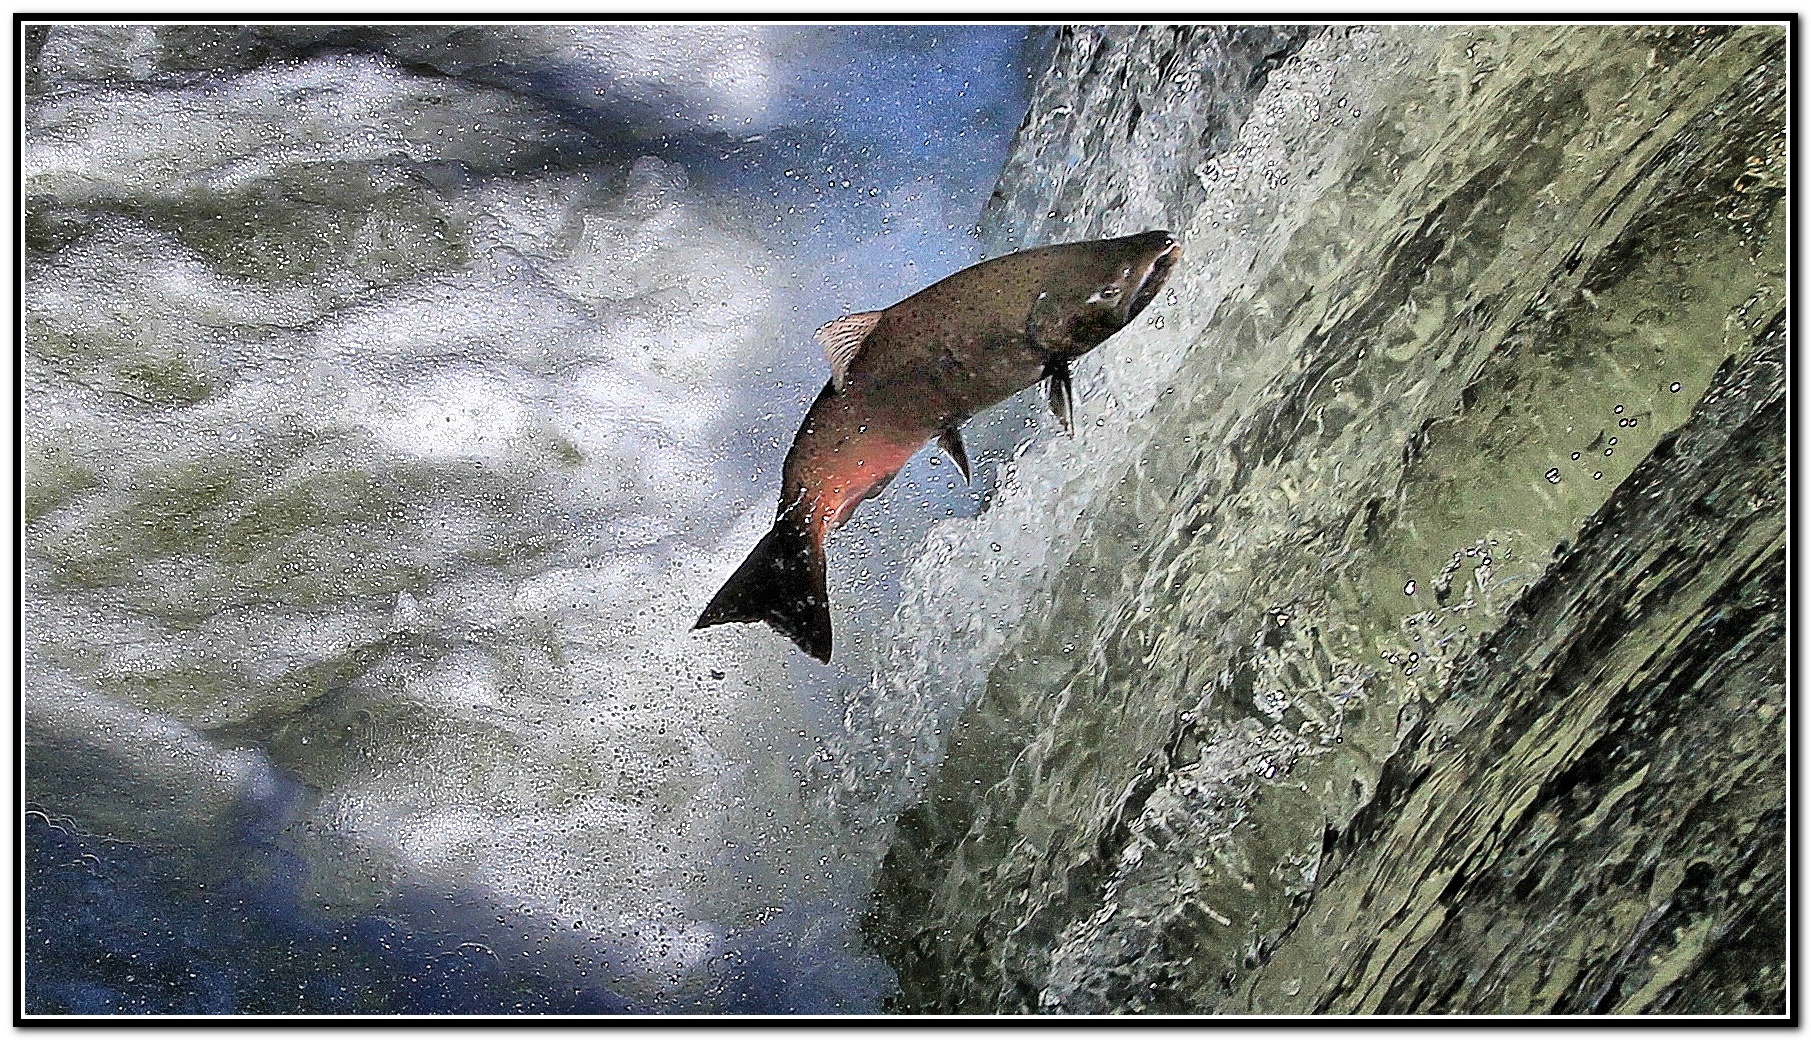 Fall Chinook salmon putting on a show in Tumwater Falls Park Olympia